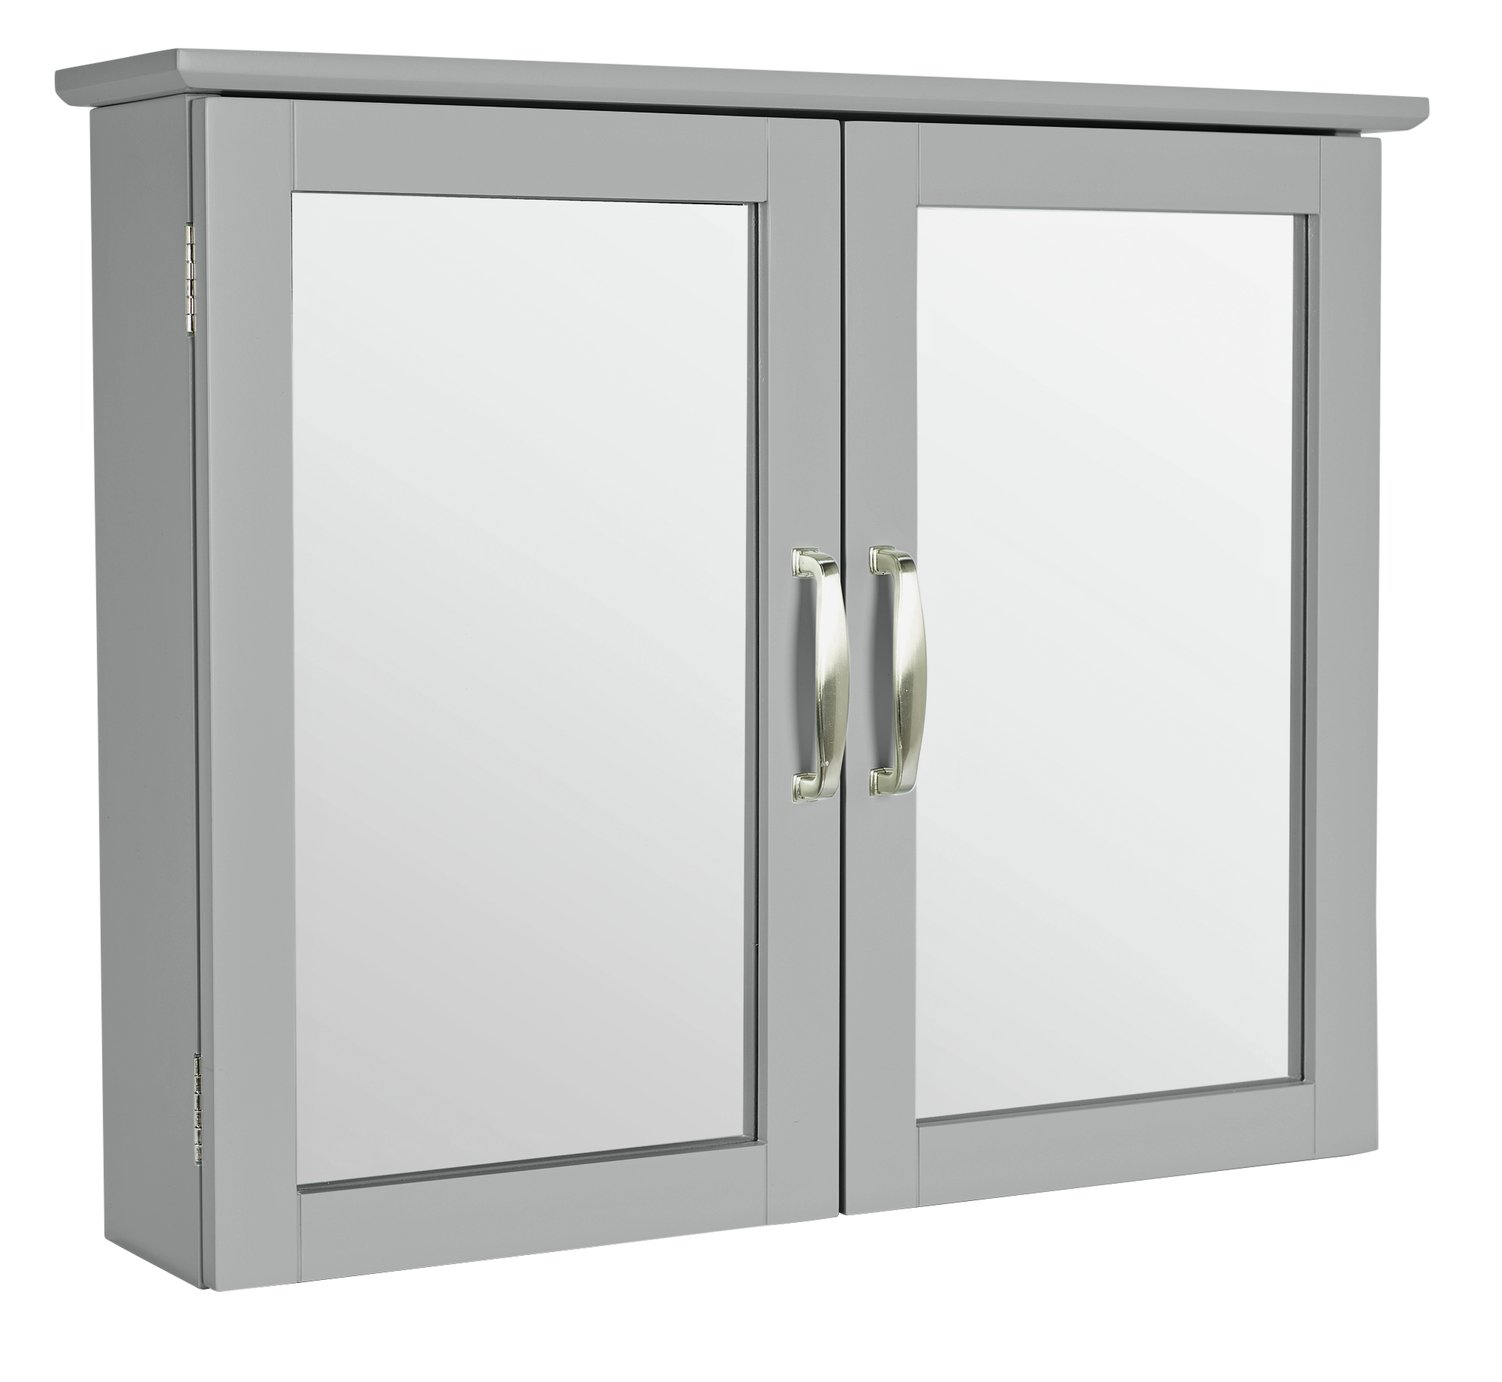 Argos Home Tongue & Groove Wall Cabinet - Grey